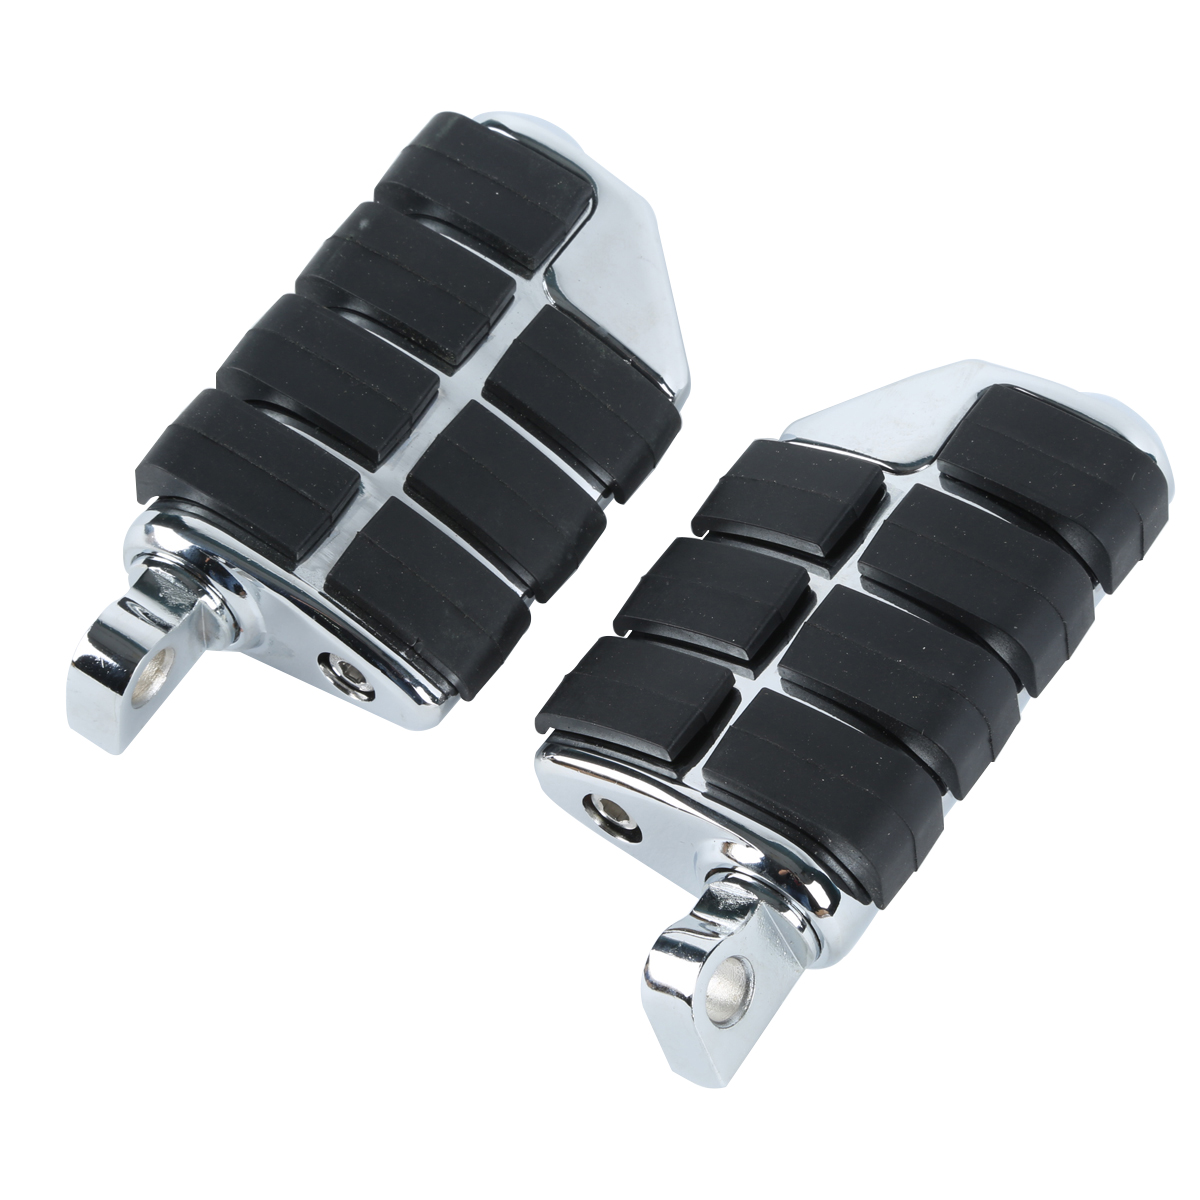 TCMT 32mm 1 1/4 Engine Guard Foot peg Kit Fits For Harley Softail Dyna Fatboy Sportster Chrome 